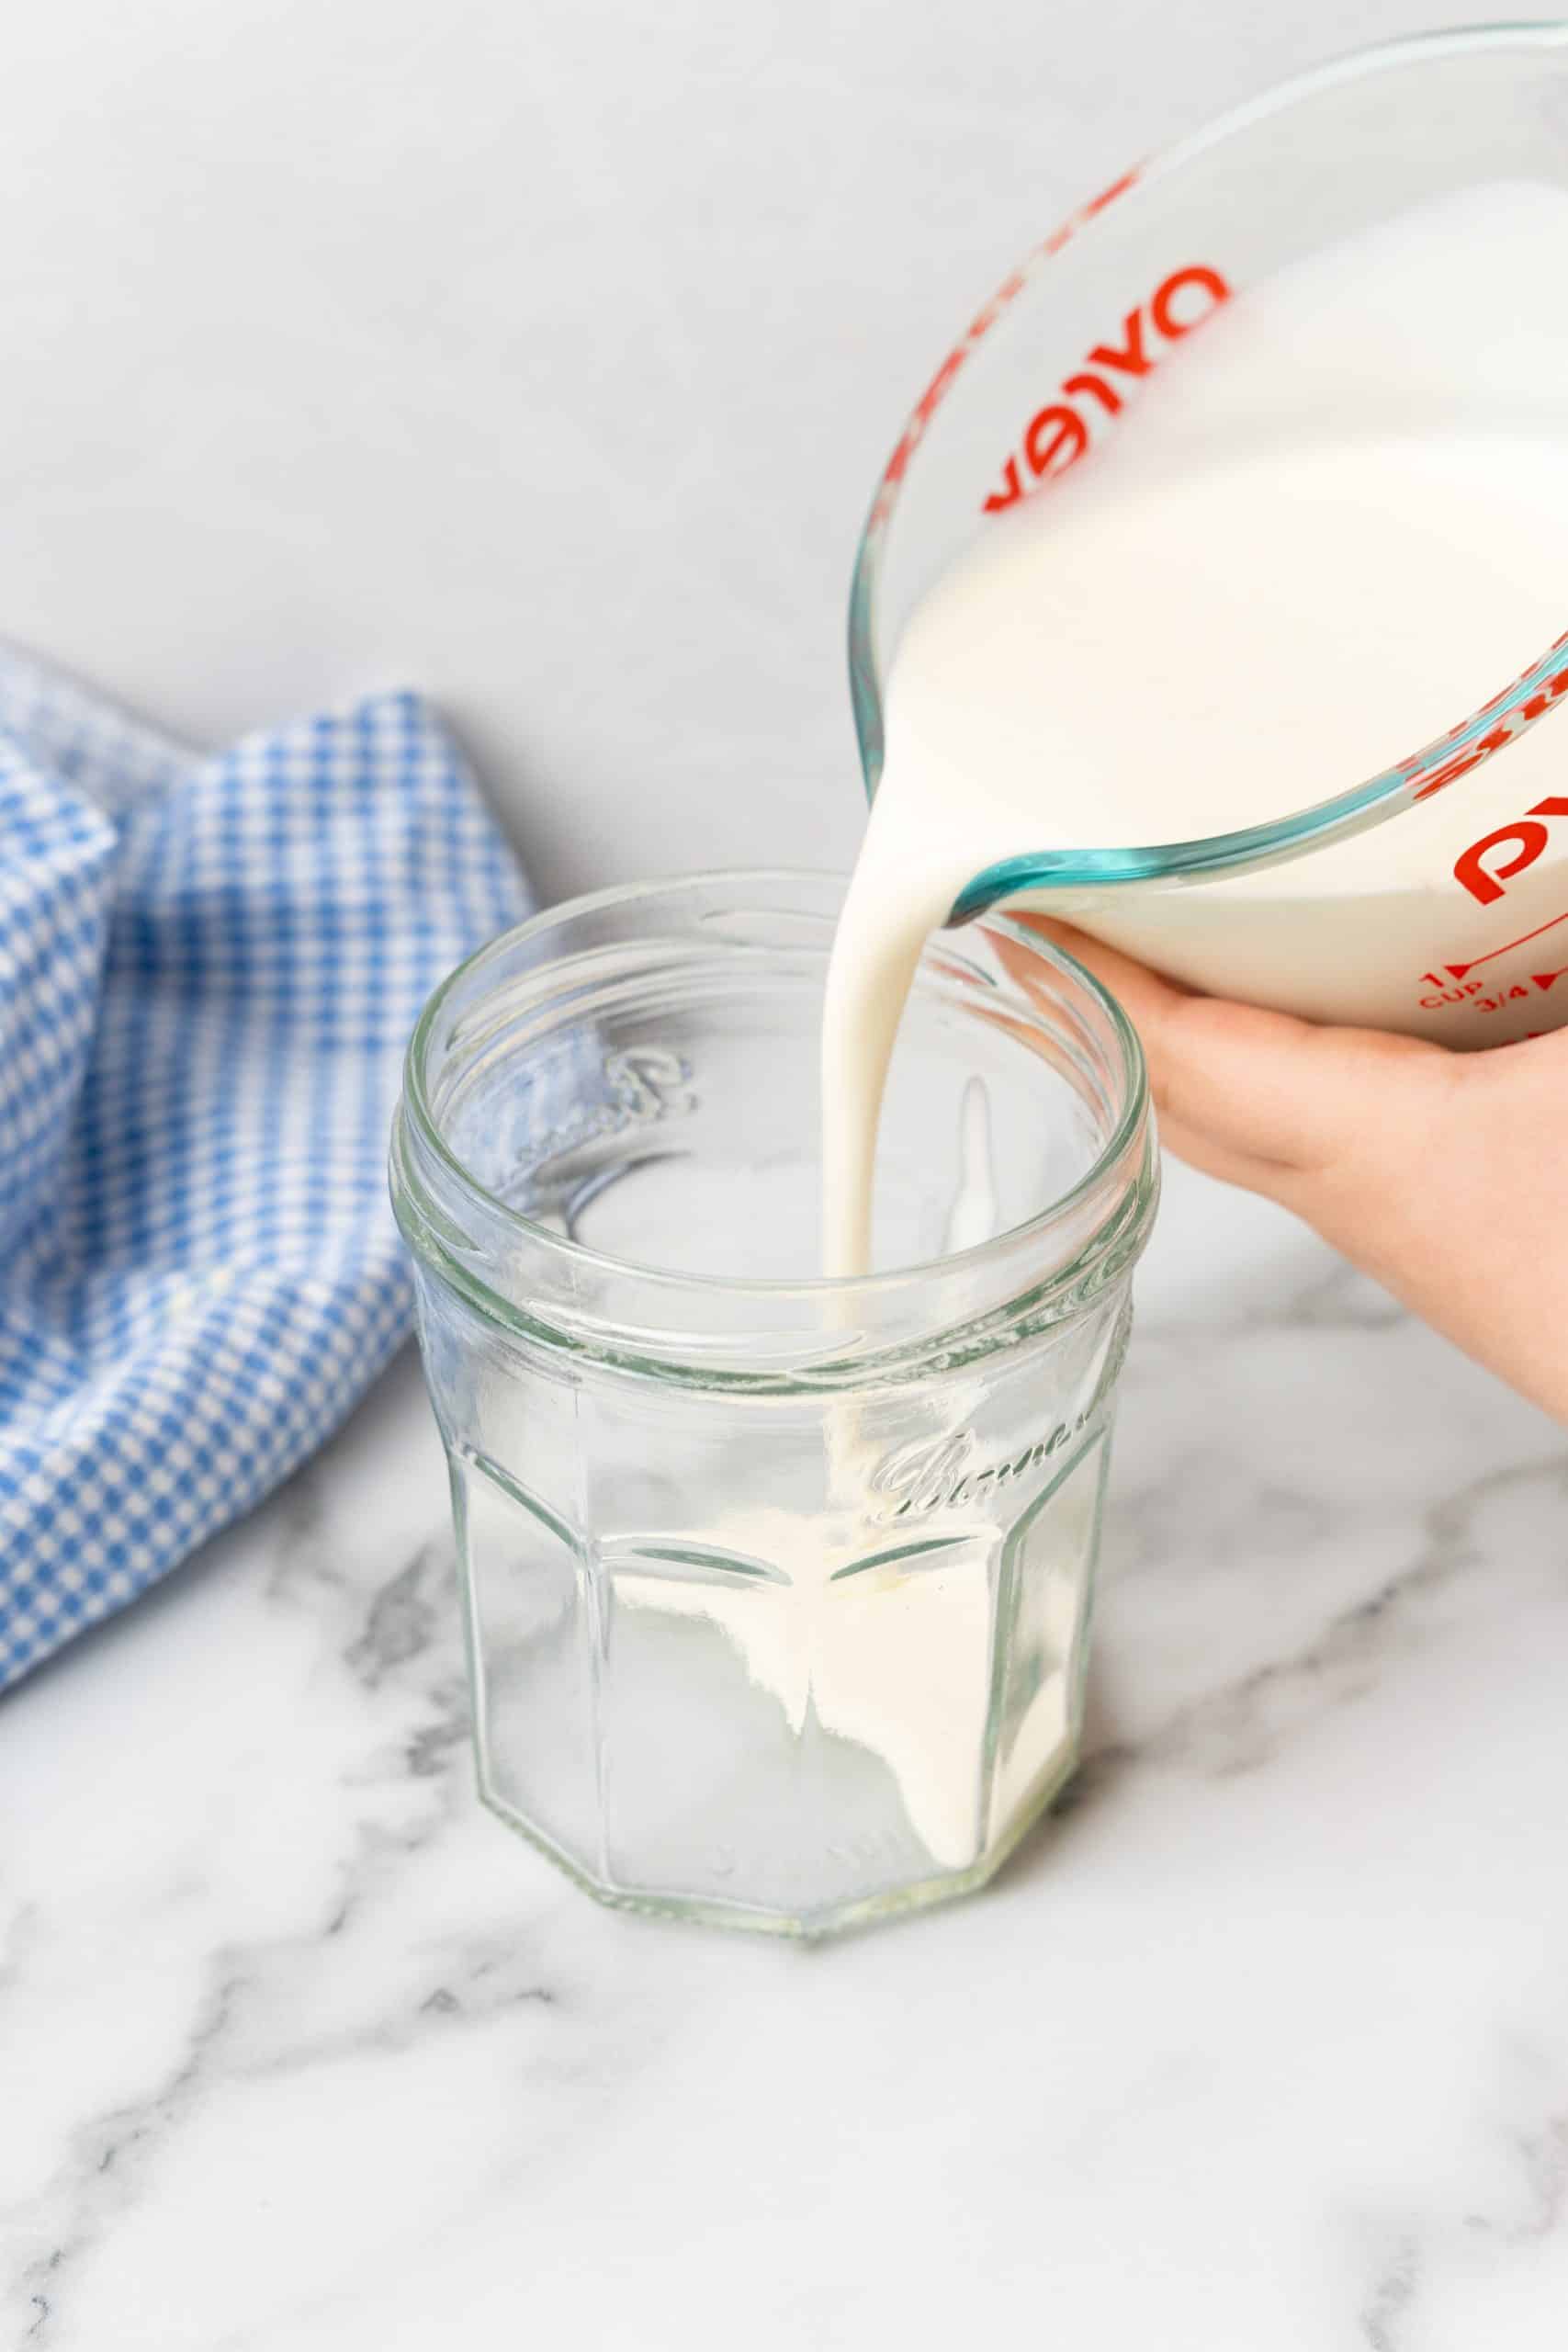 cream being poured into a glass jar from a measuring cup